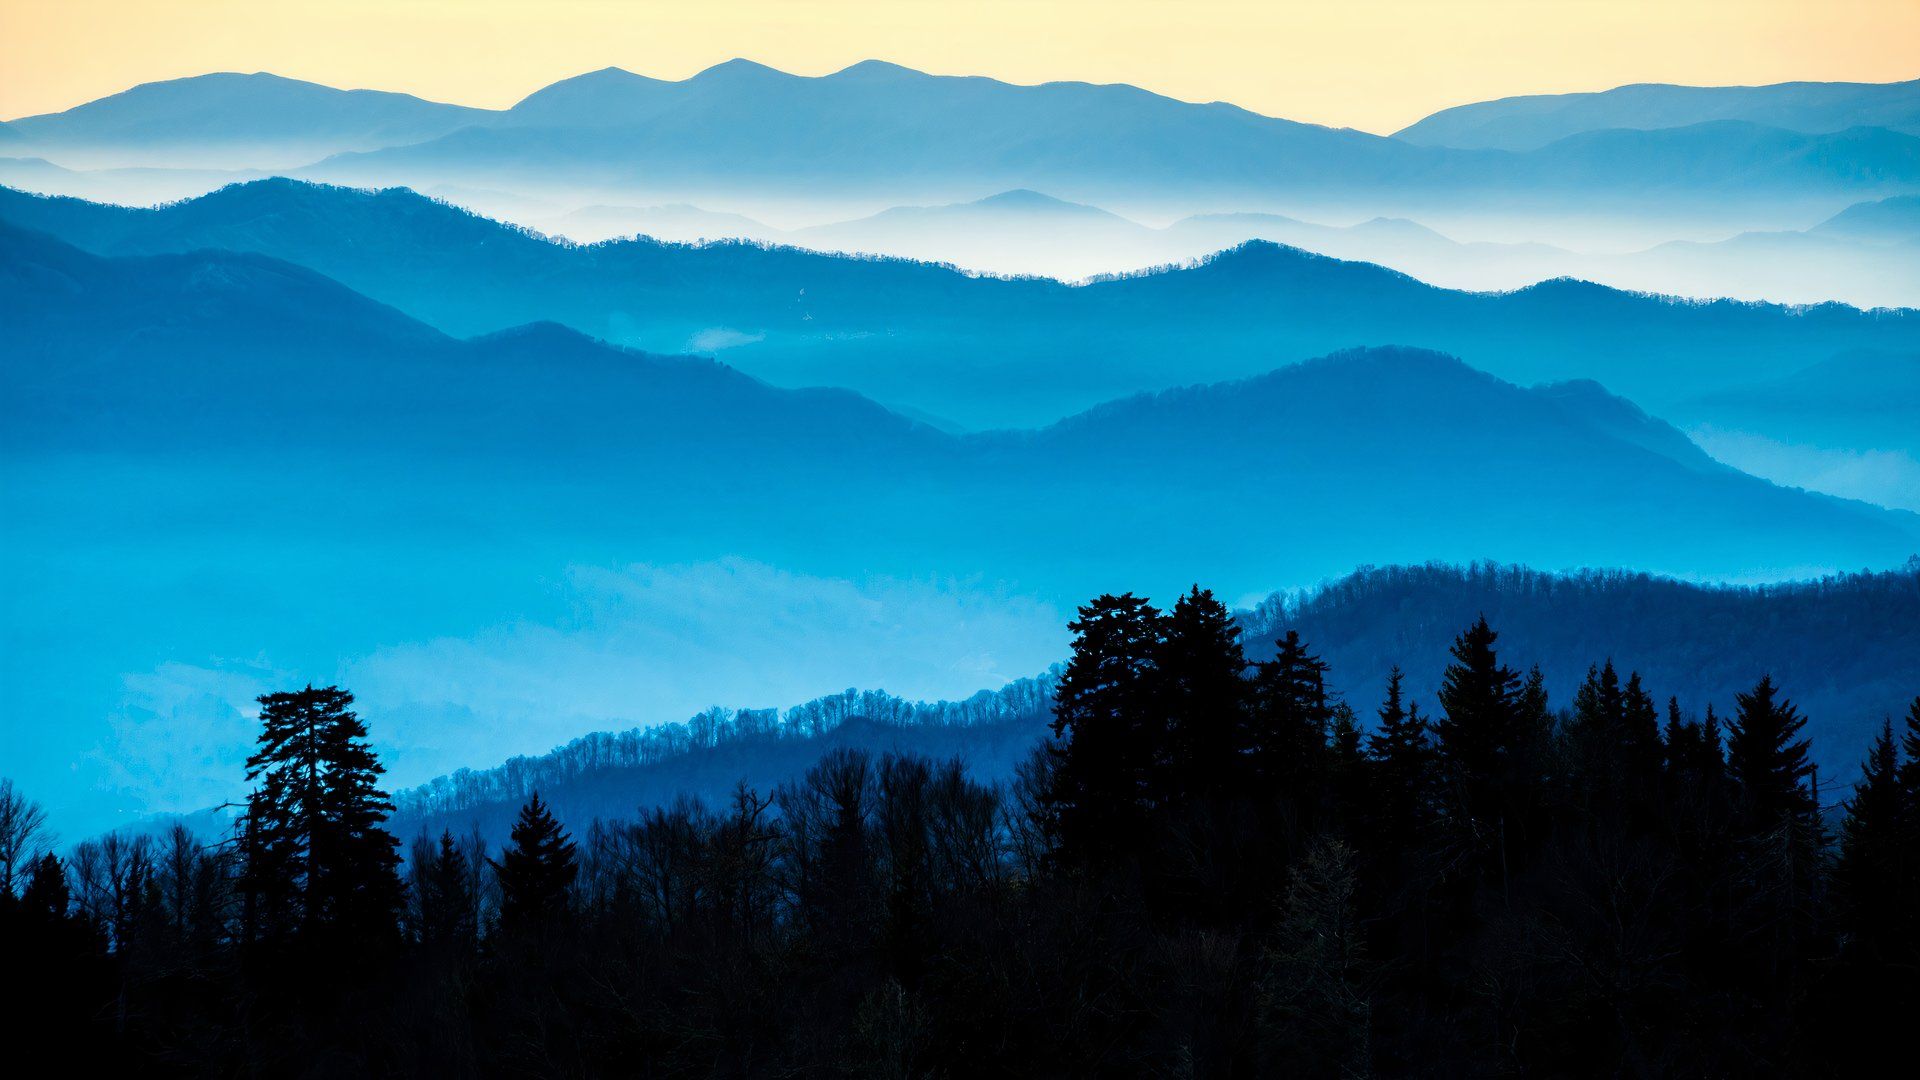 View of the Smoky Mountains from Route 441 Newfound Gap